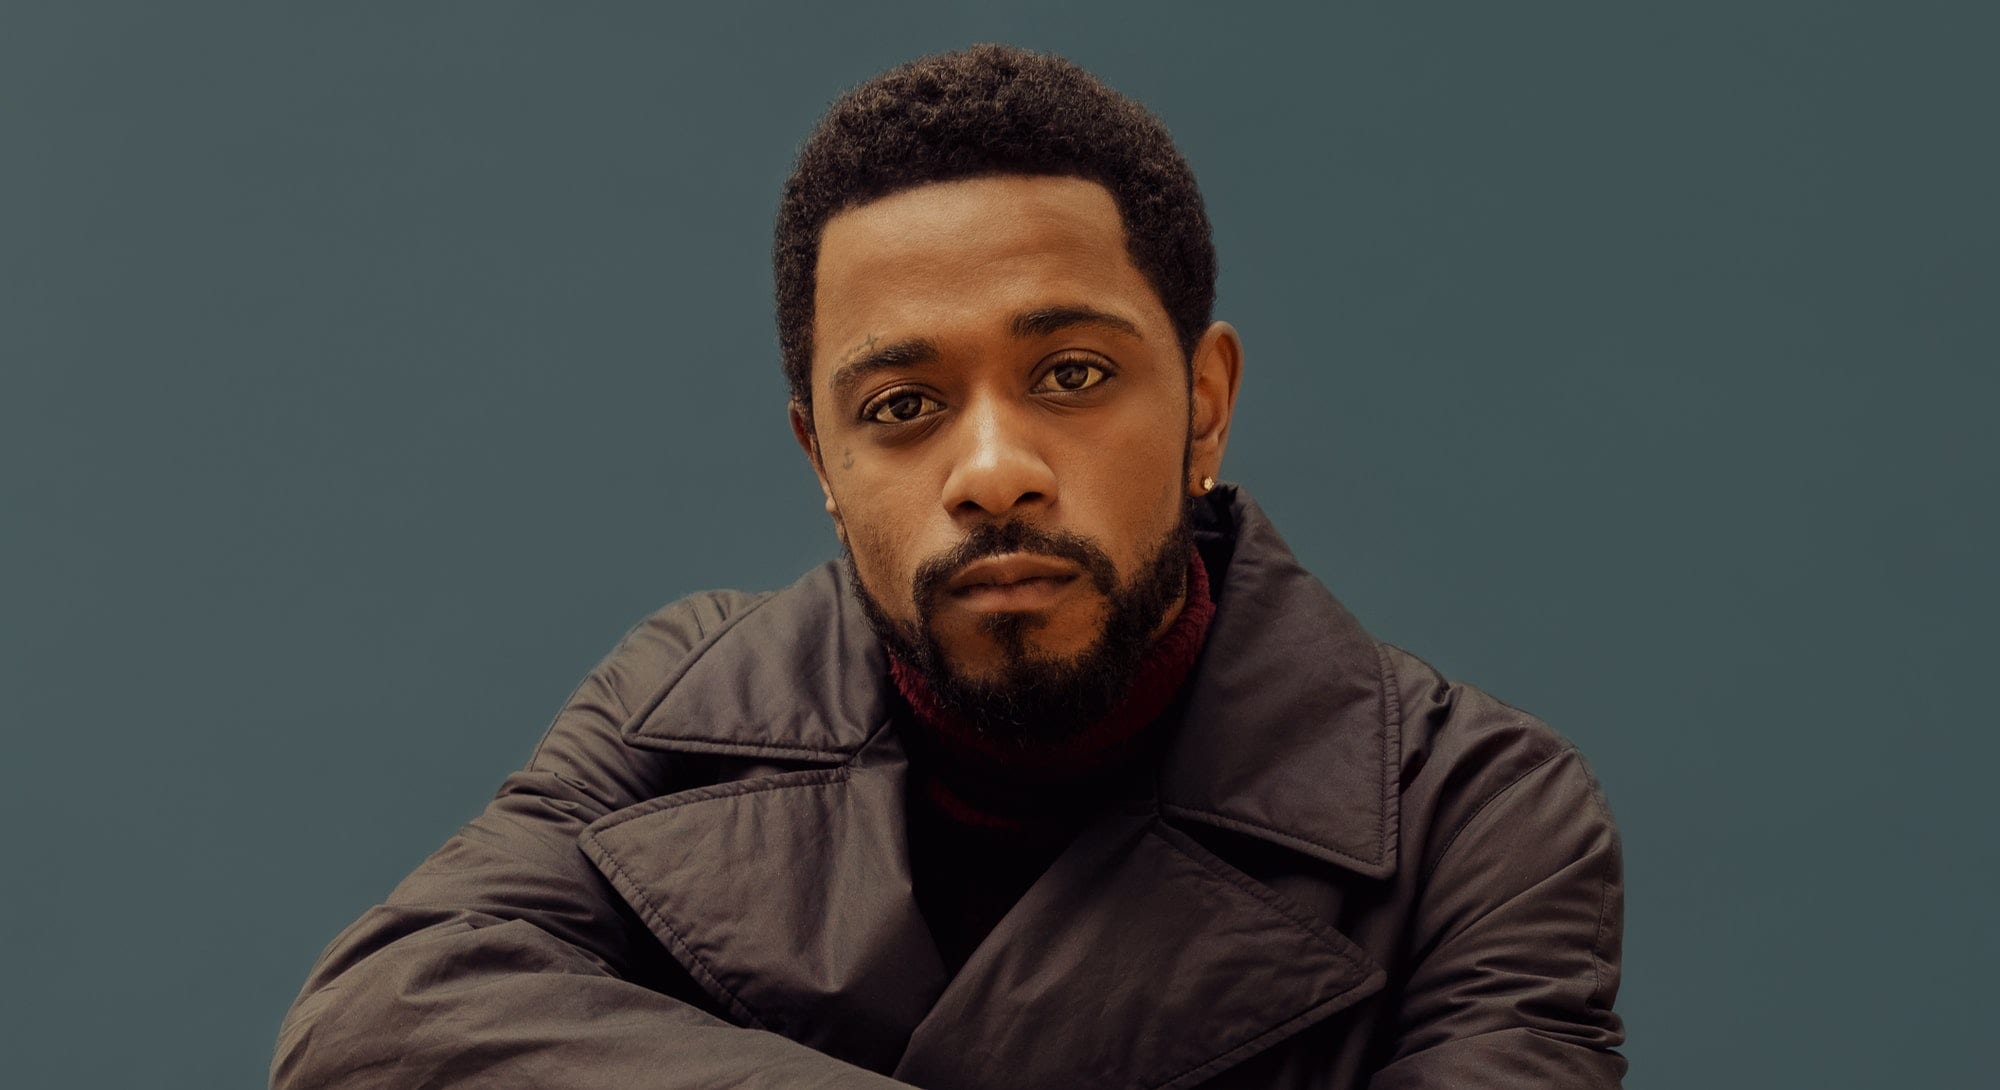 Who is LaKeith Stanfield dating? 